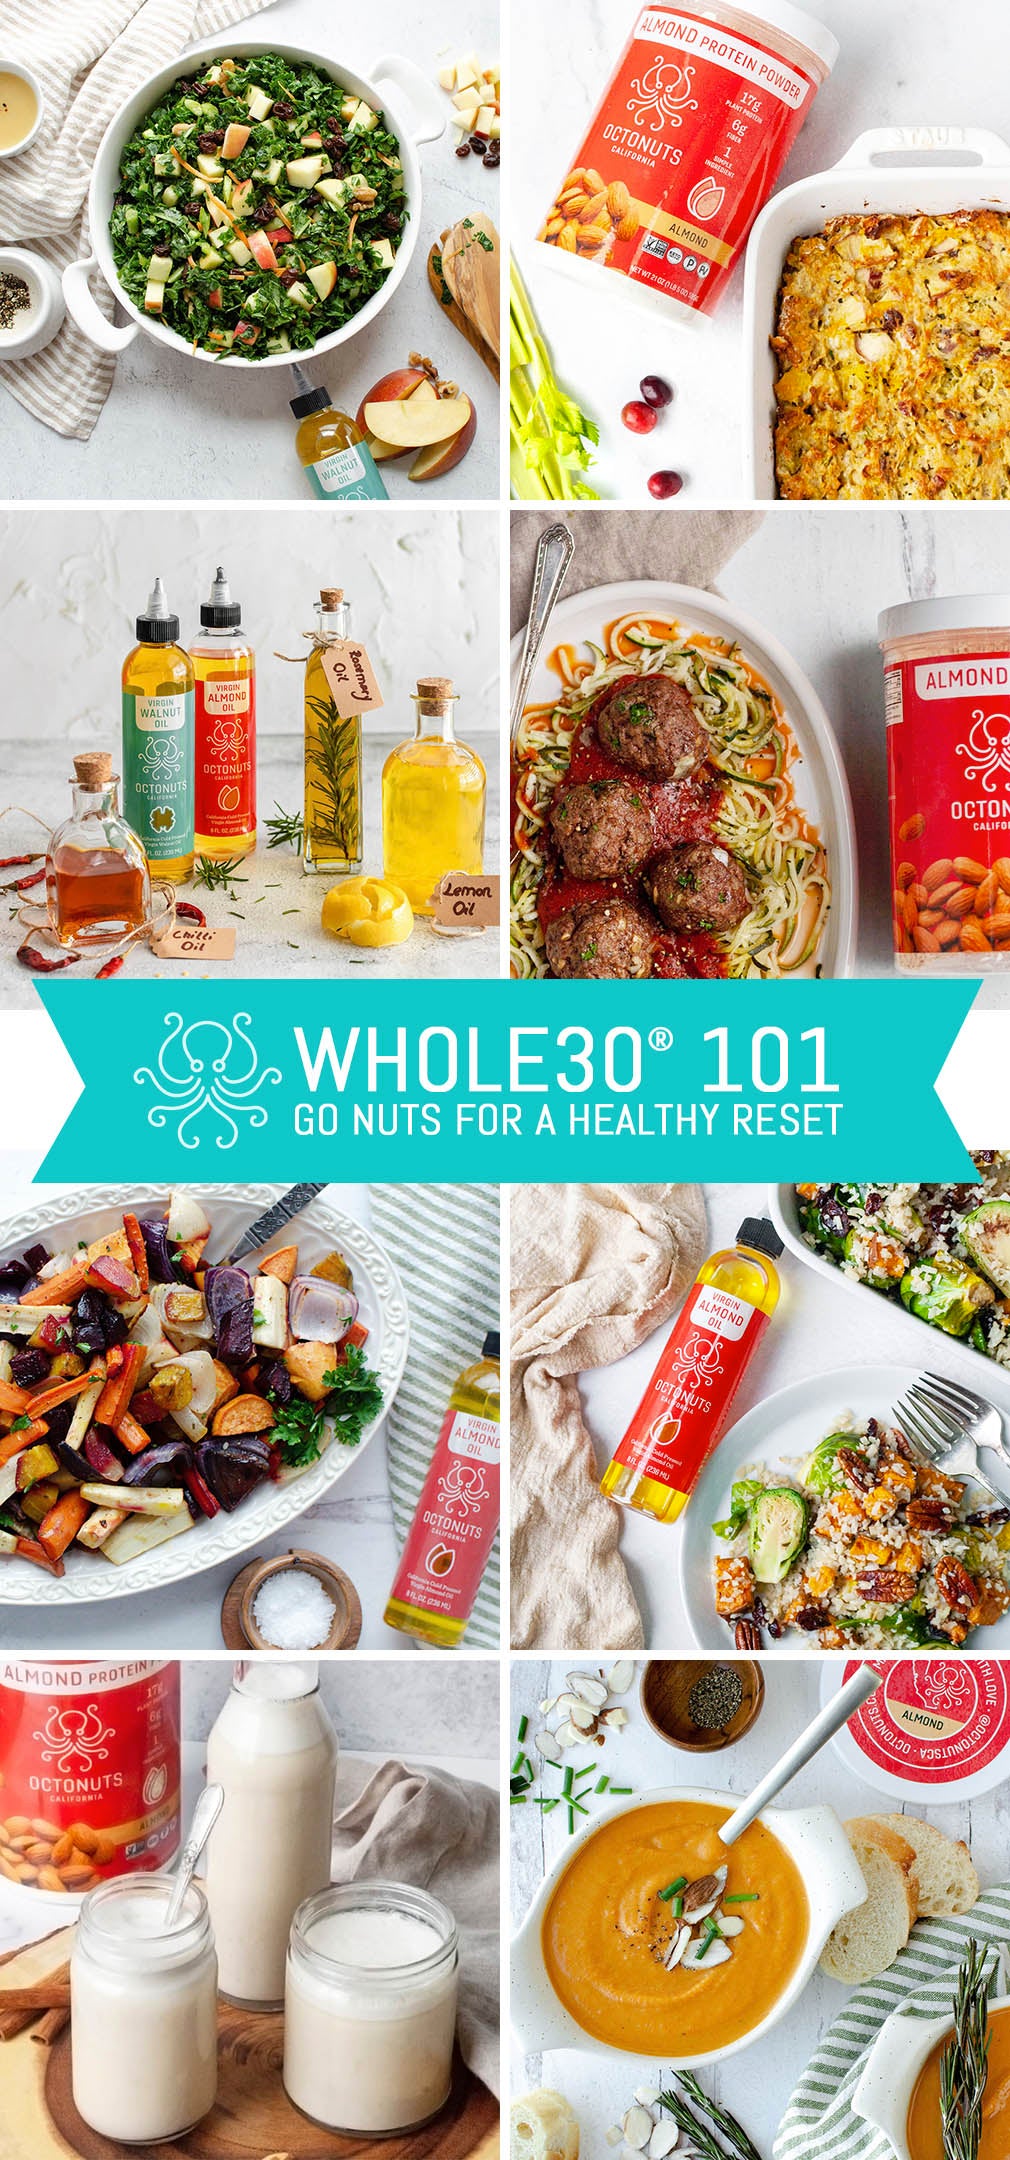 Whole30® 101: Go Nuts for a Healthy Reset